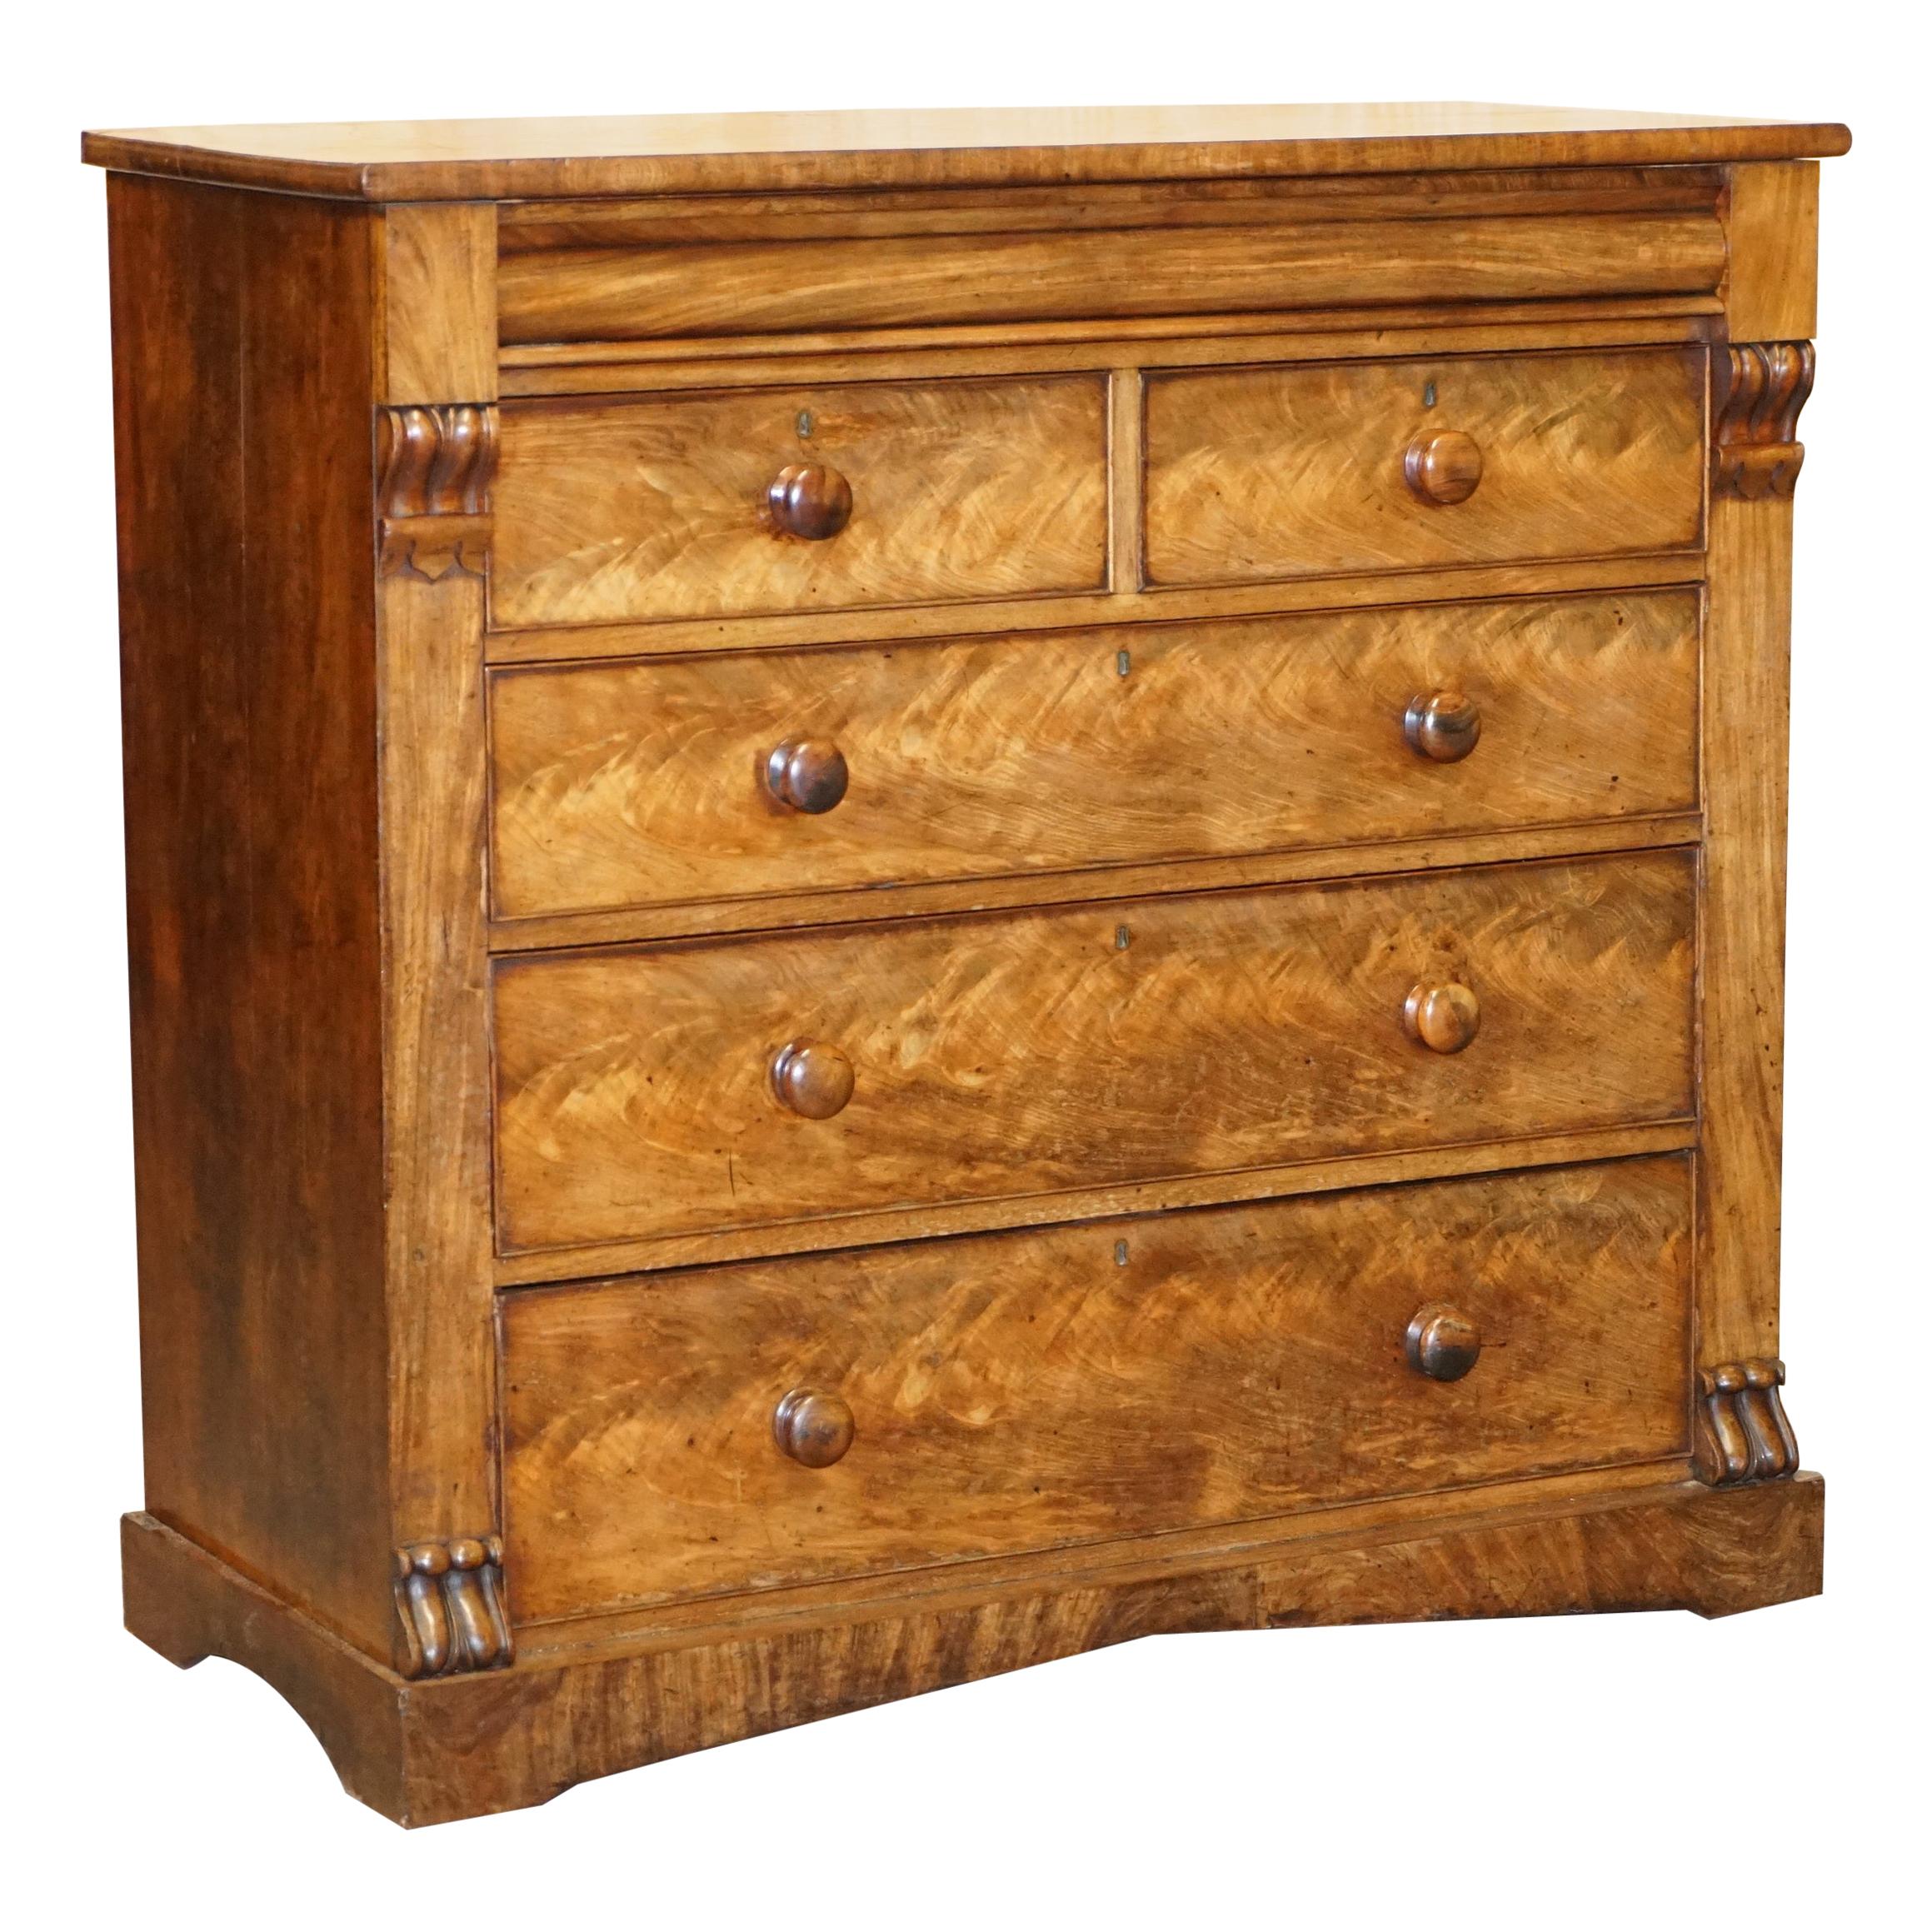 Huge 19th Century Victorian Light Flamed Hardwood Chest of Drawers Hidden Drawer For Sale